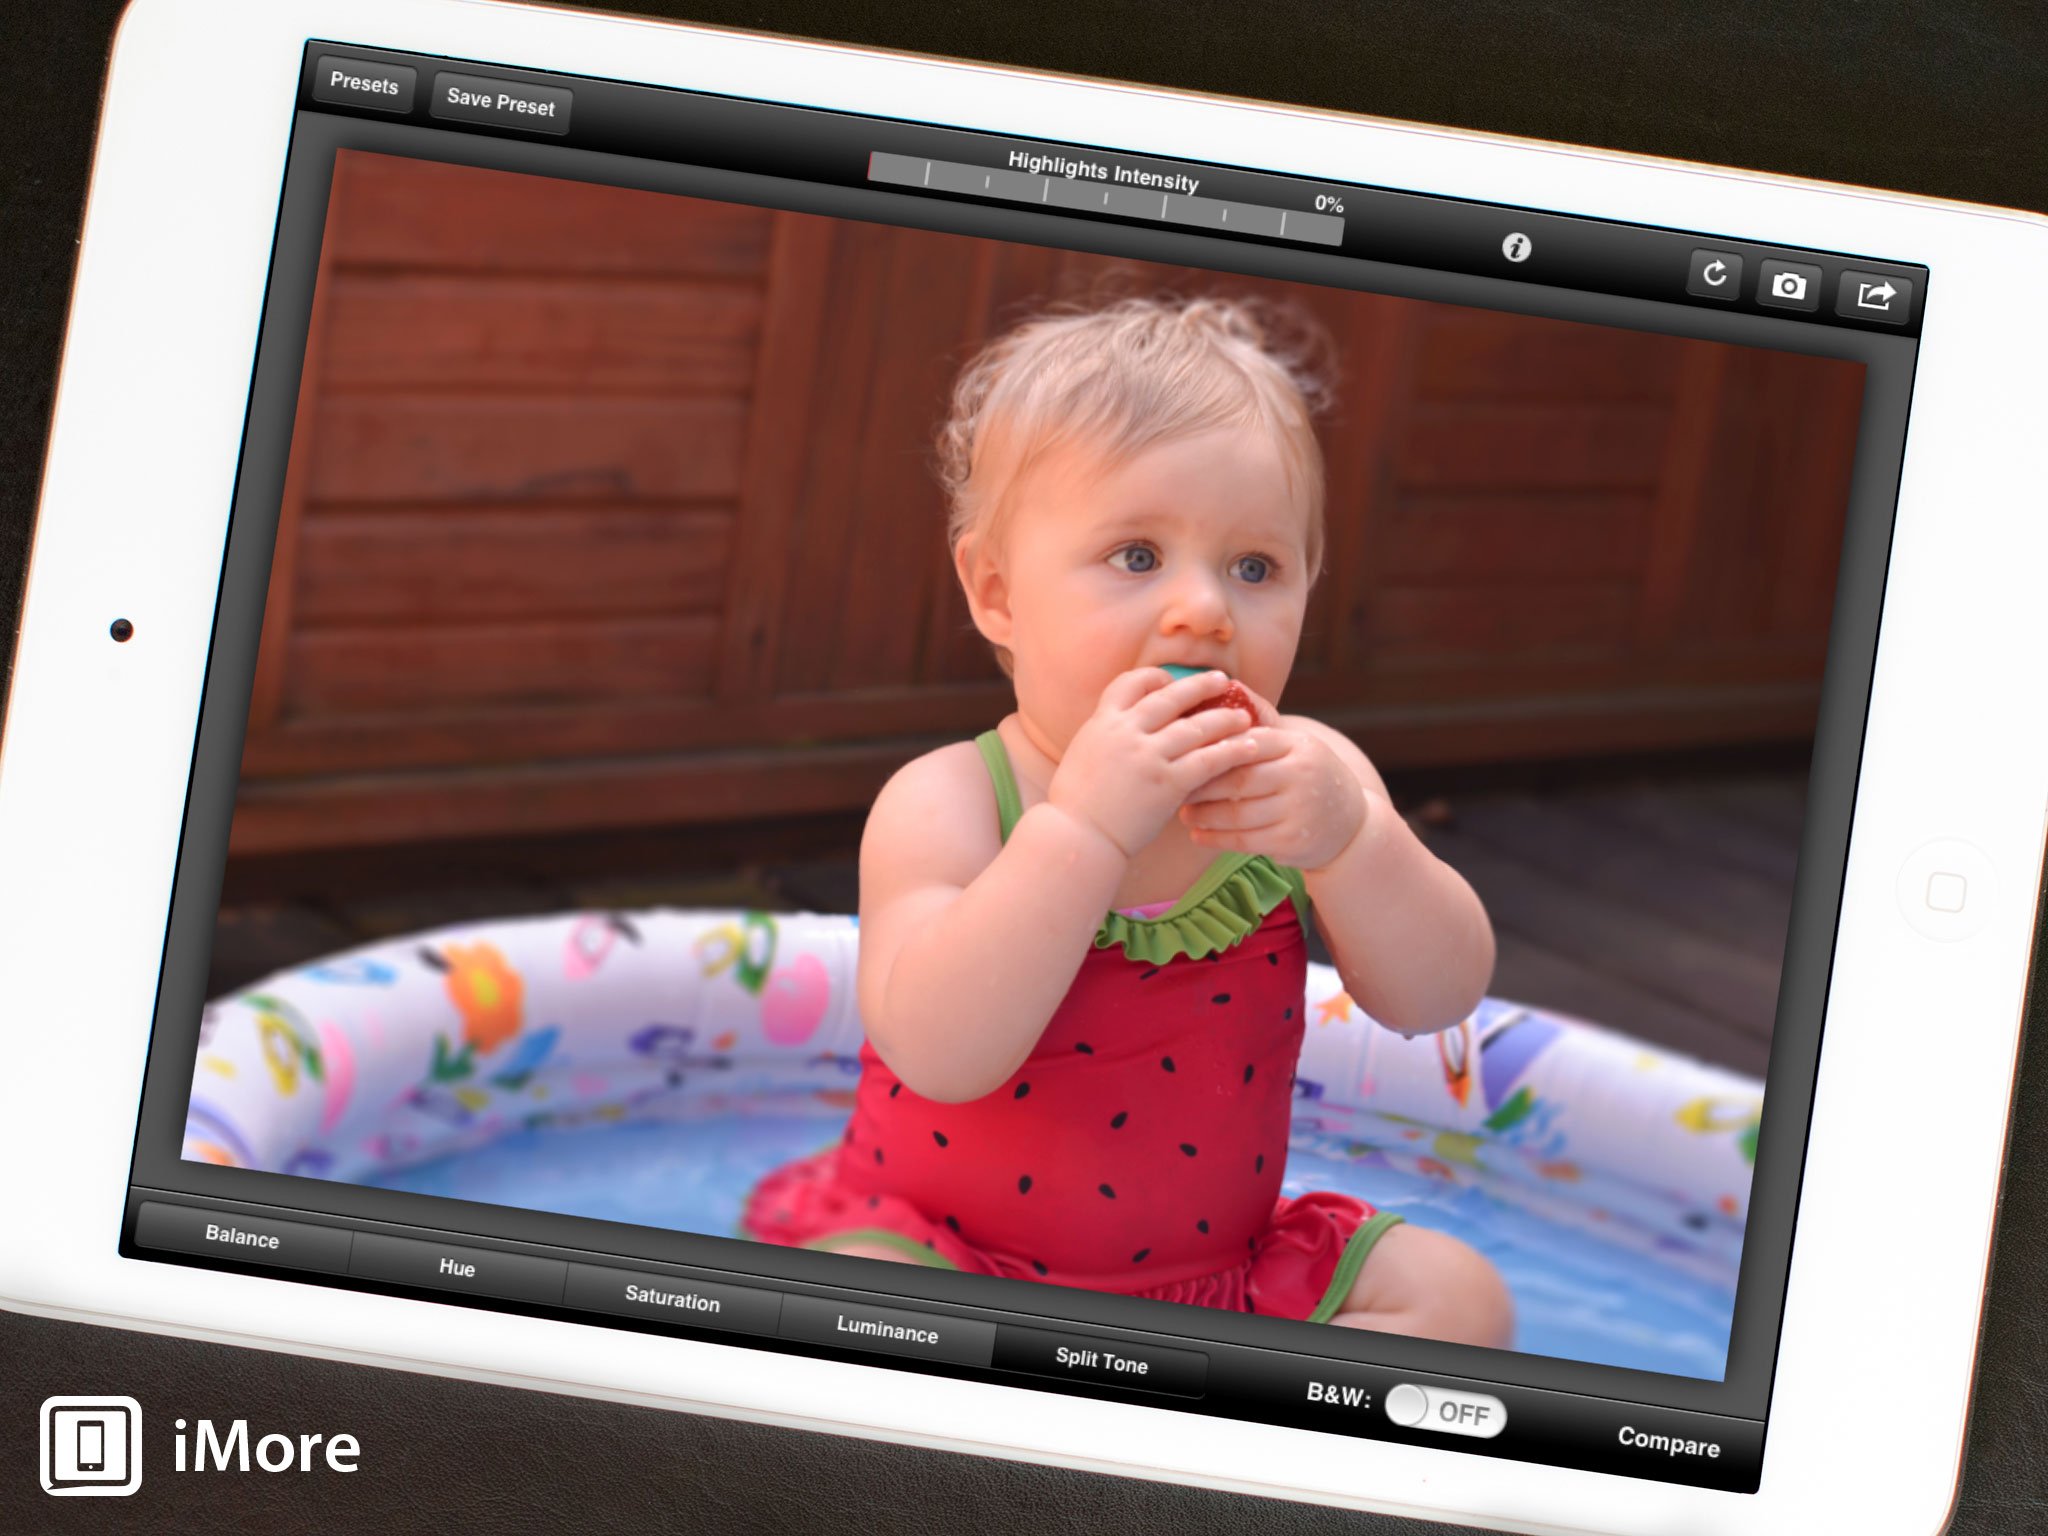 Photoristic HD for iPad is a great canvas for basic to semi-advanced photo editing